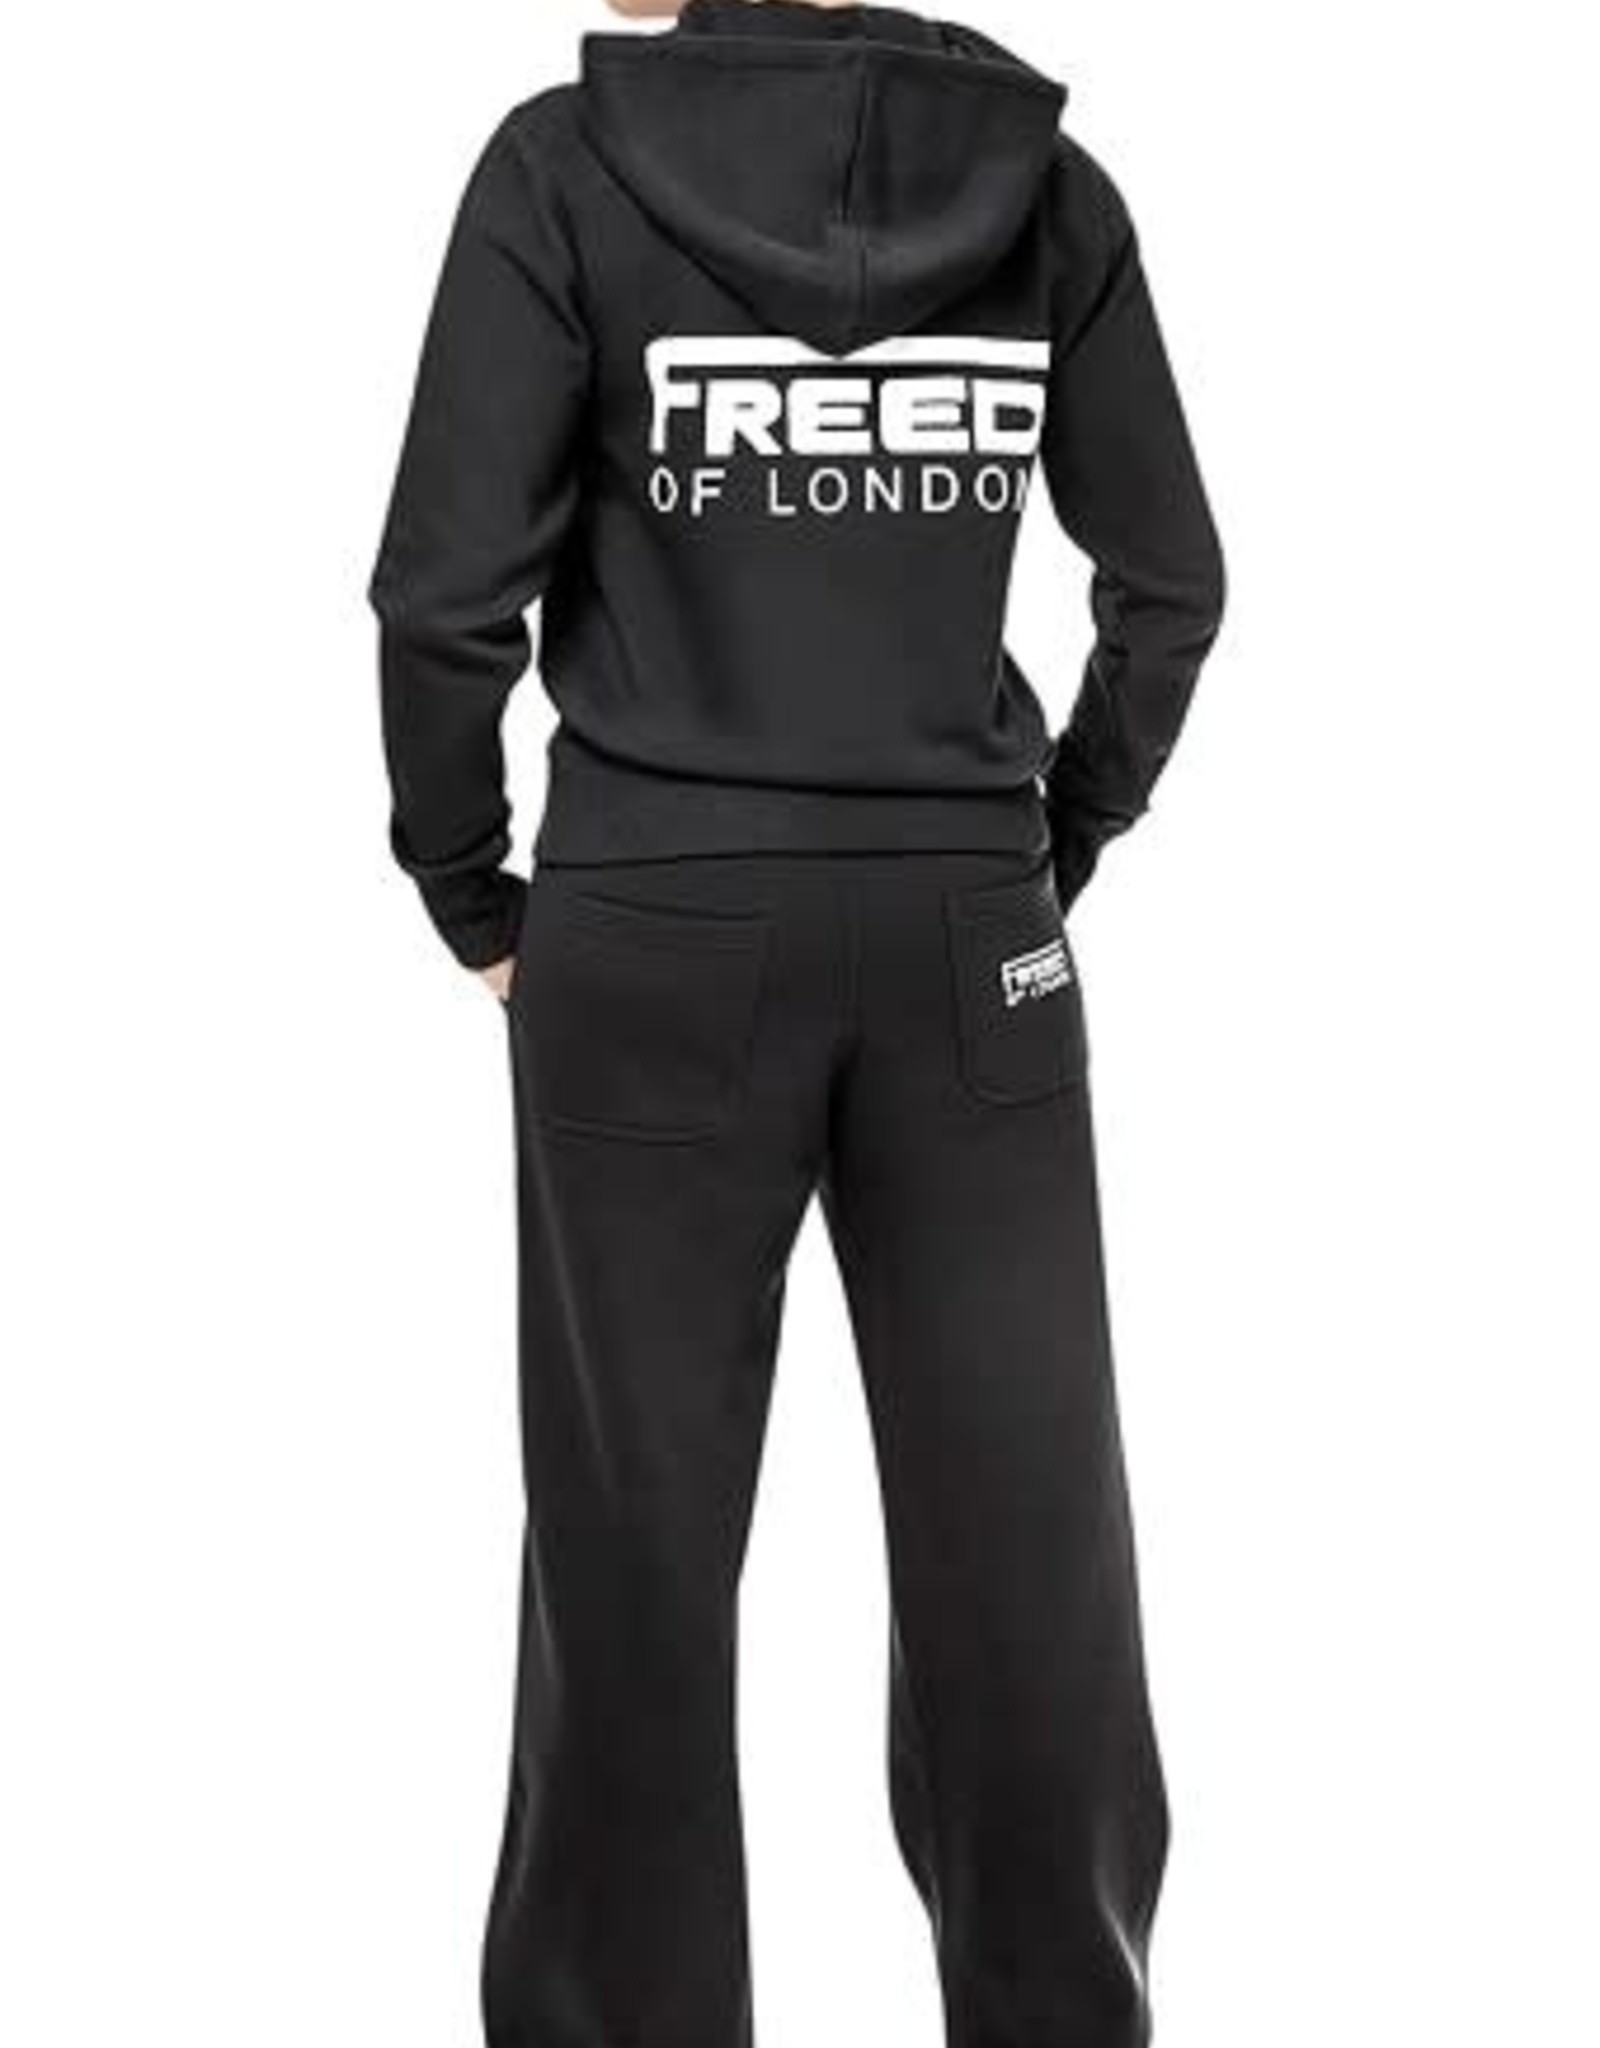 Freed Hooded Top